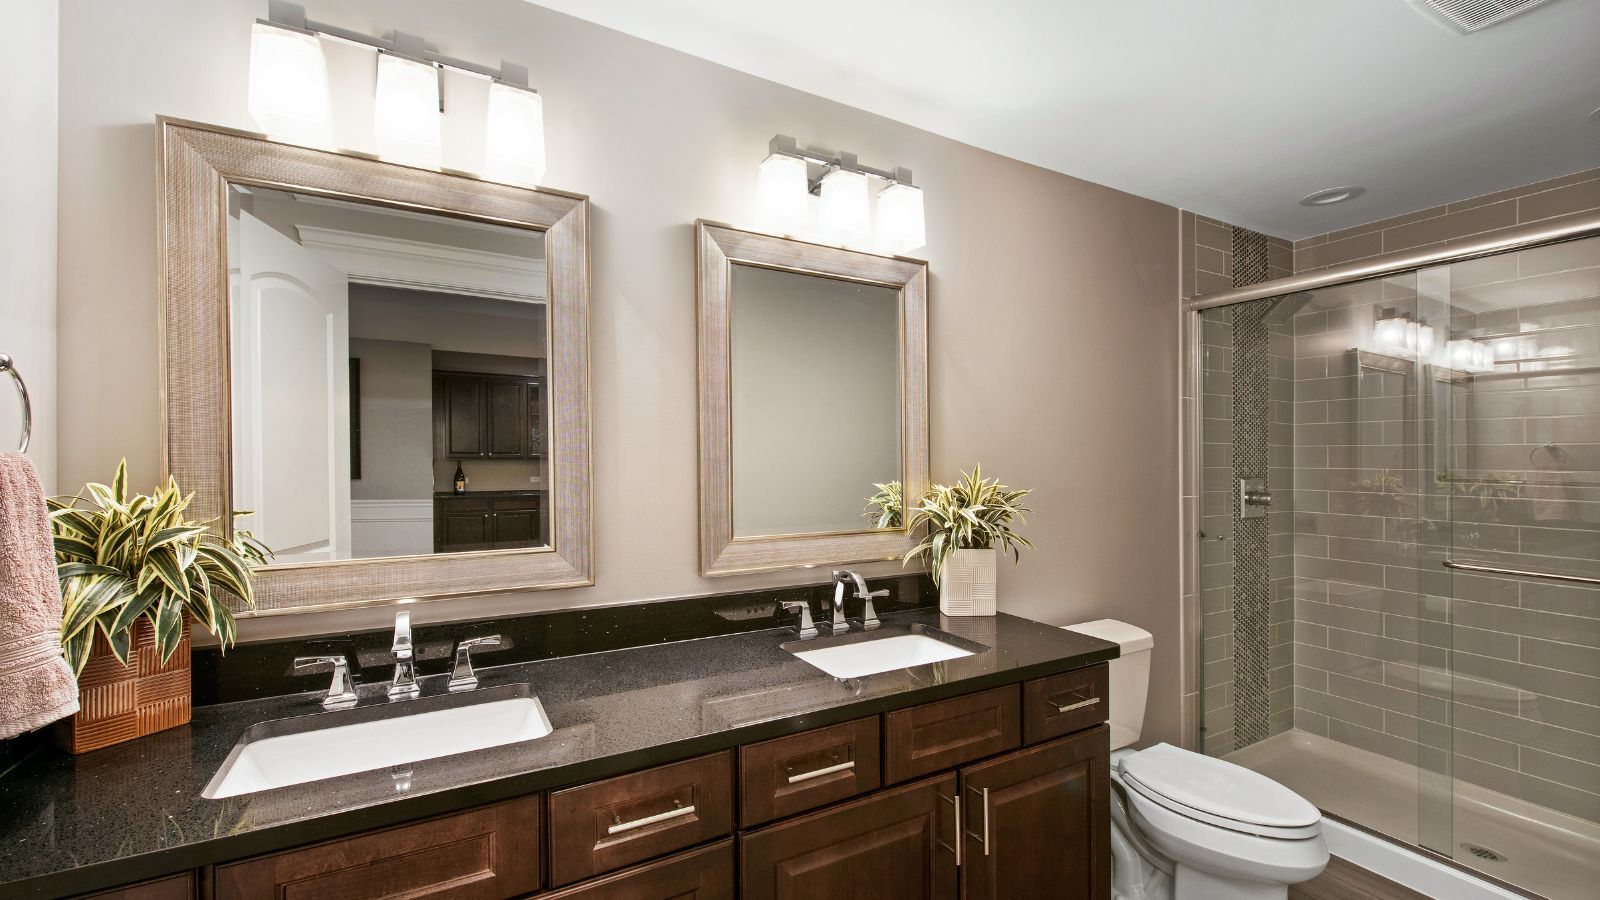 Does a double vanity increase home value?